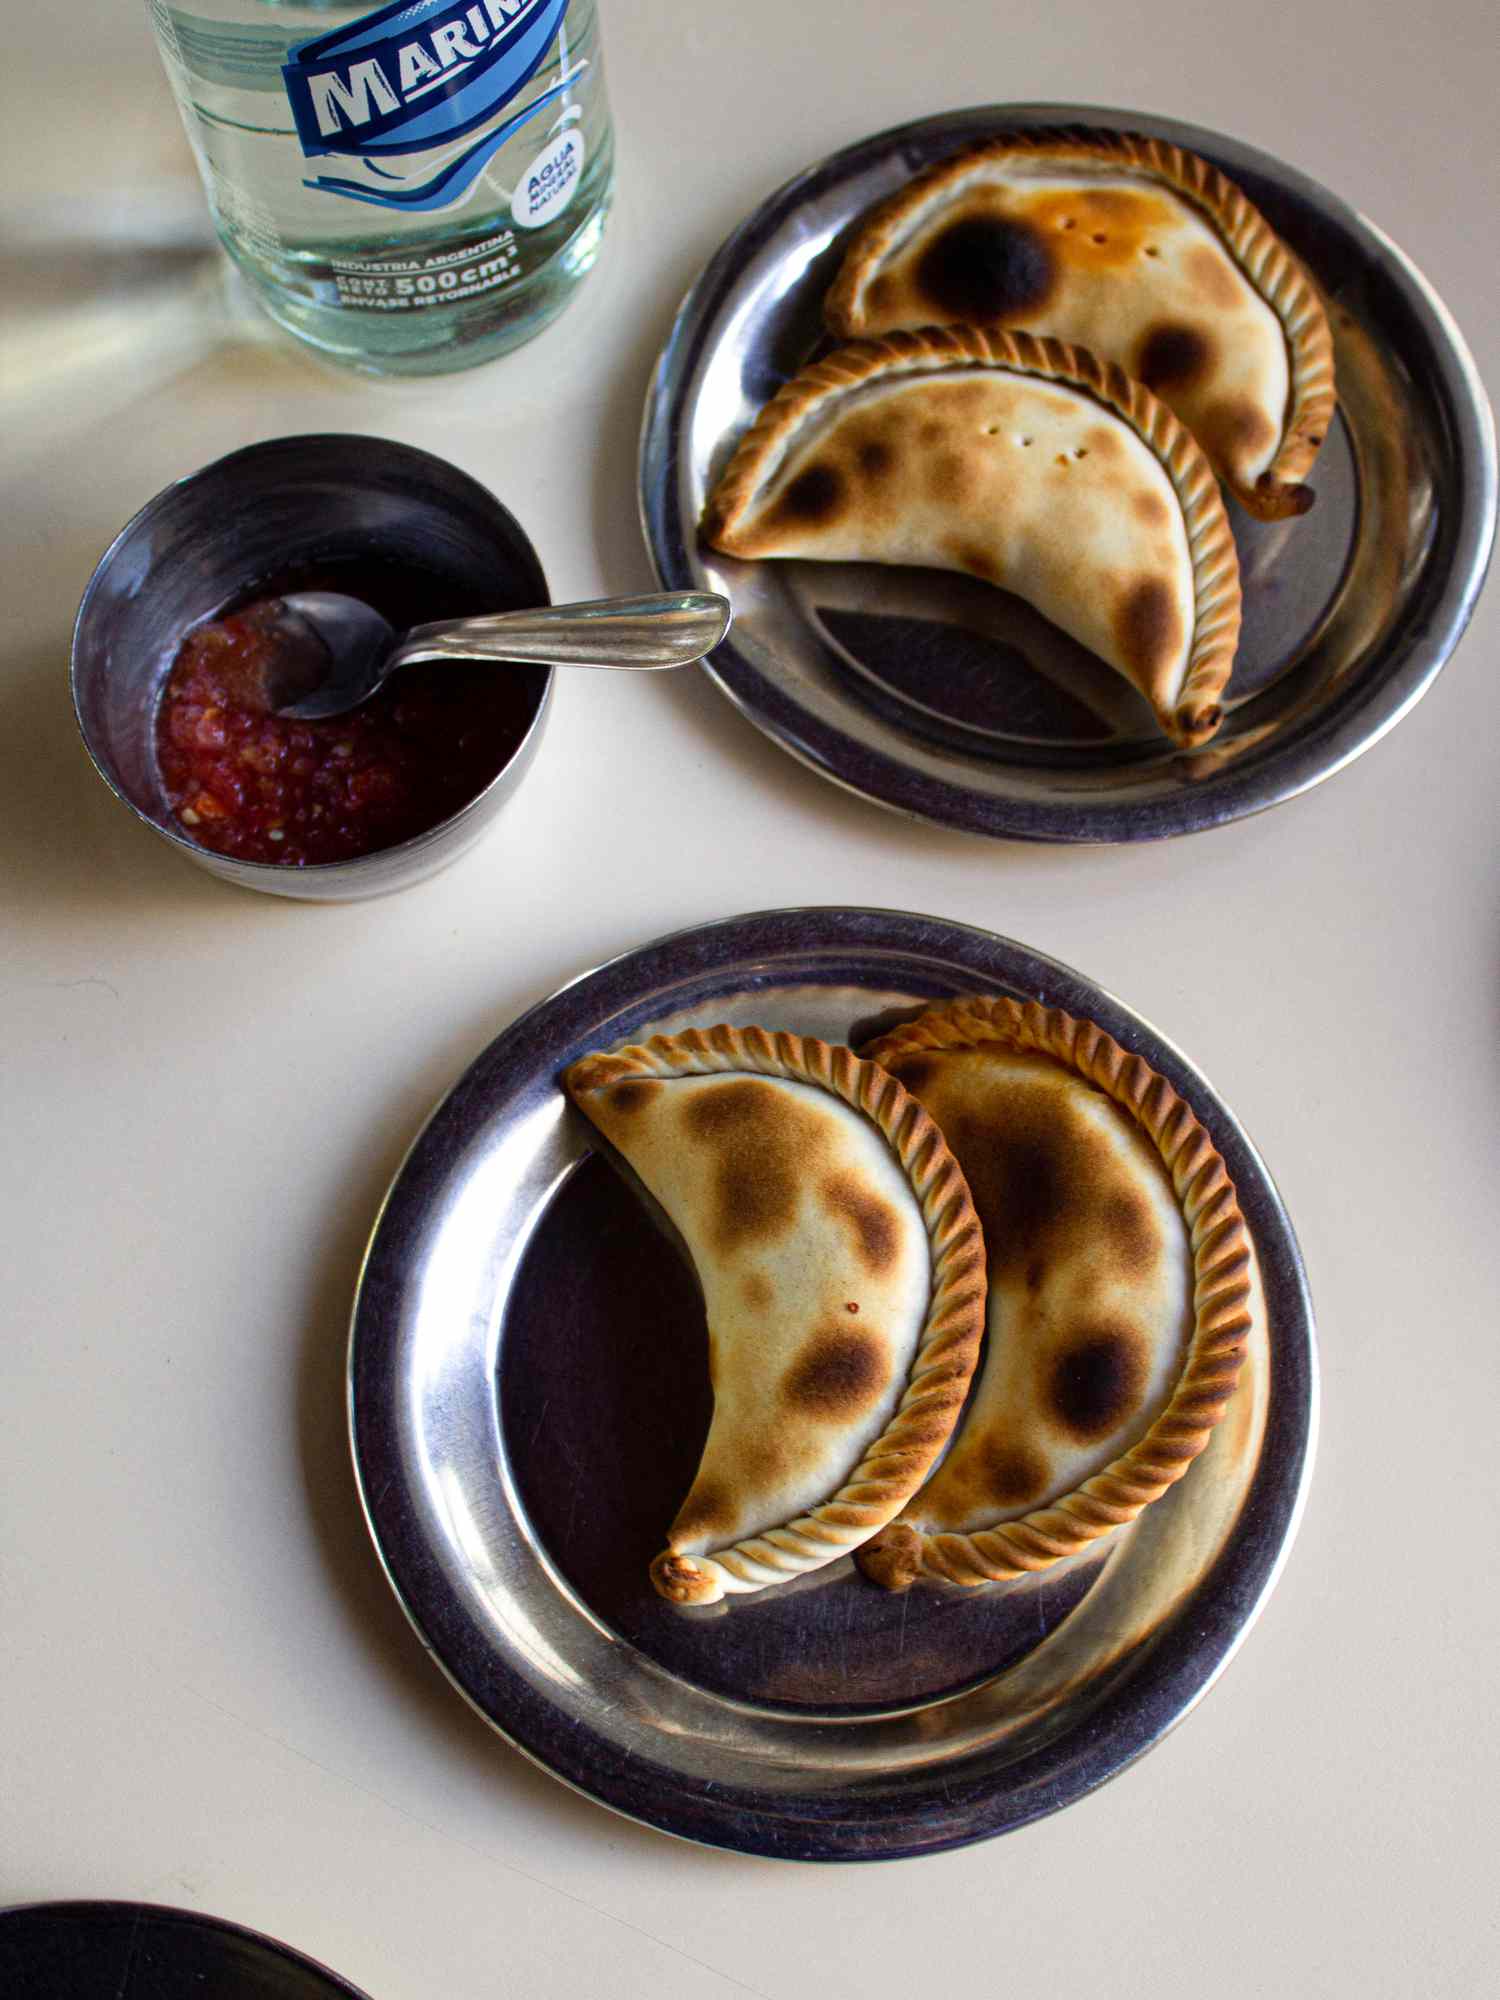 Overhead view of two servings of empanadas